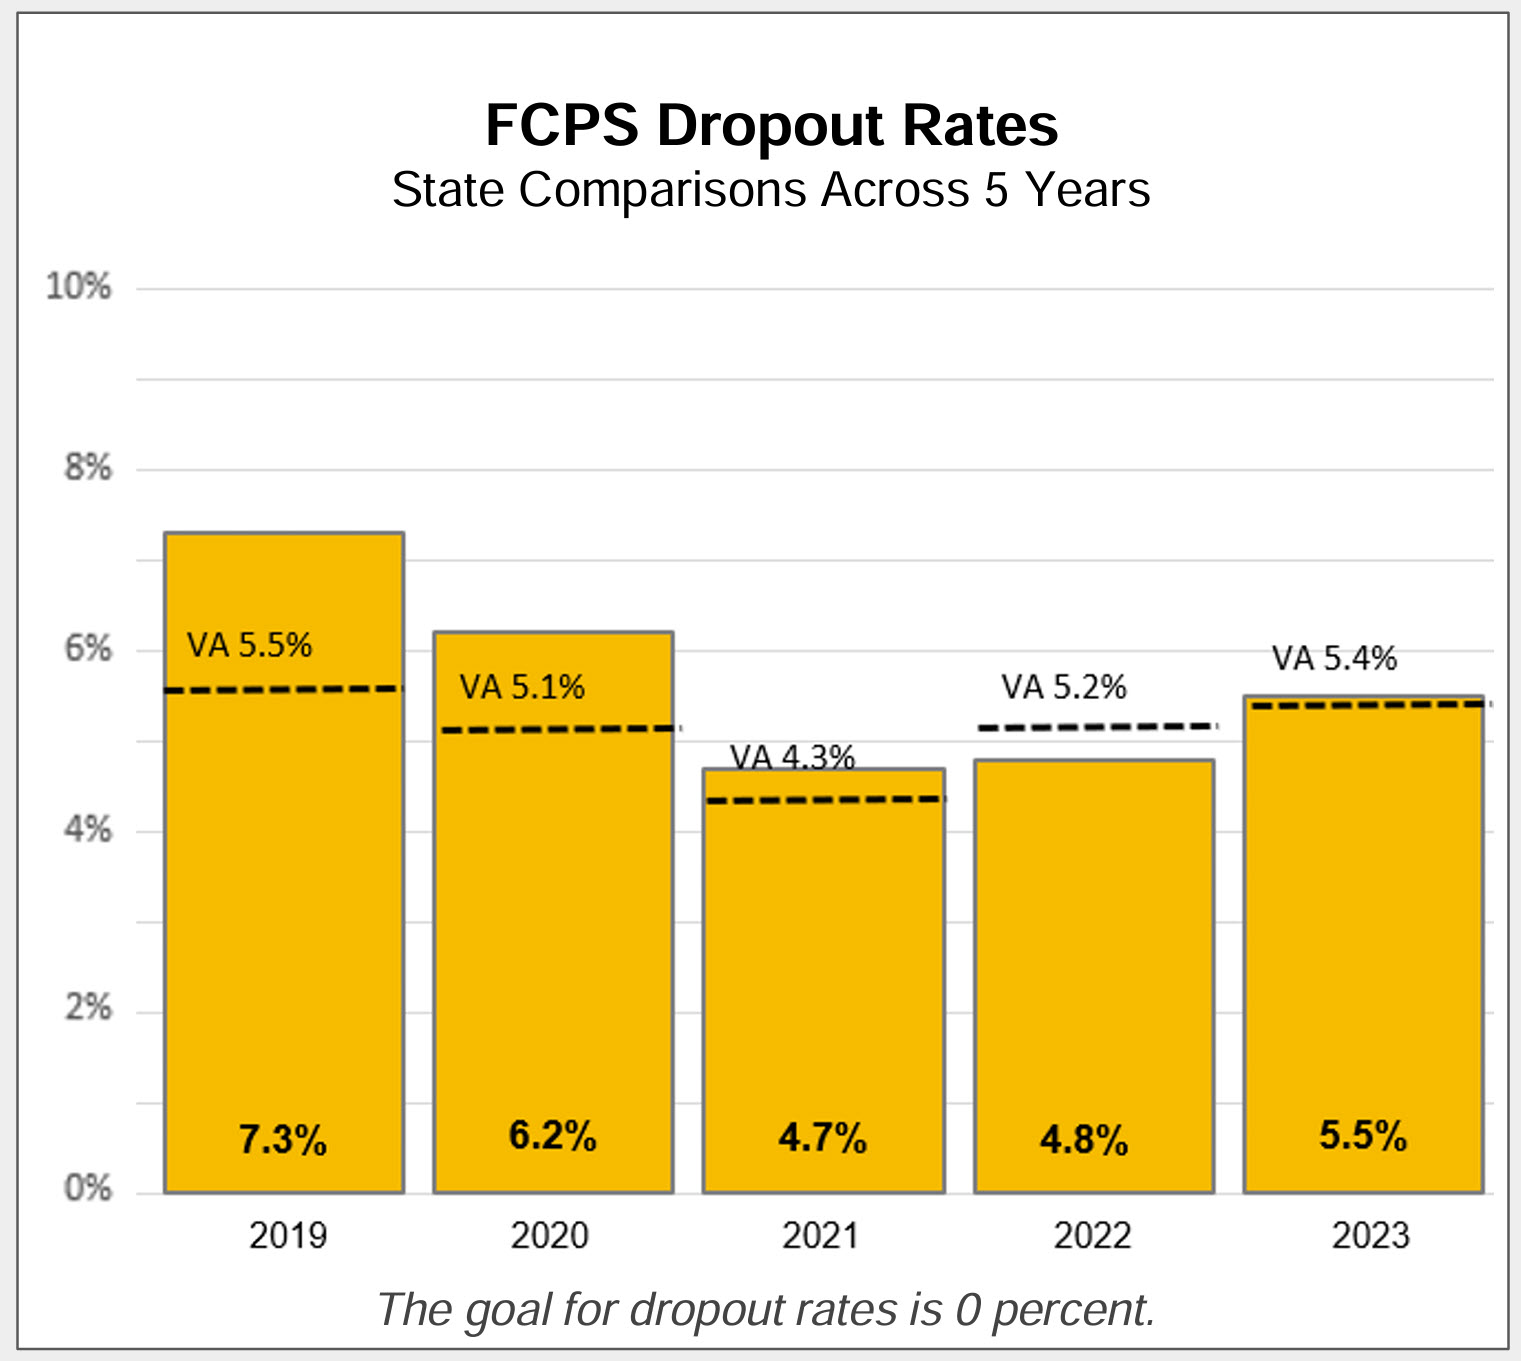 FCPS Dropout Rates. Detail in accordion below graphic.